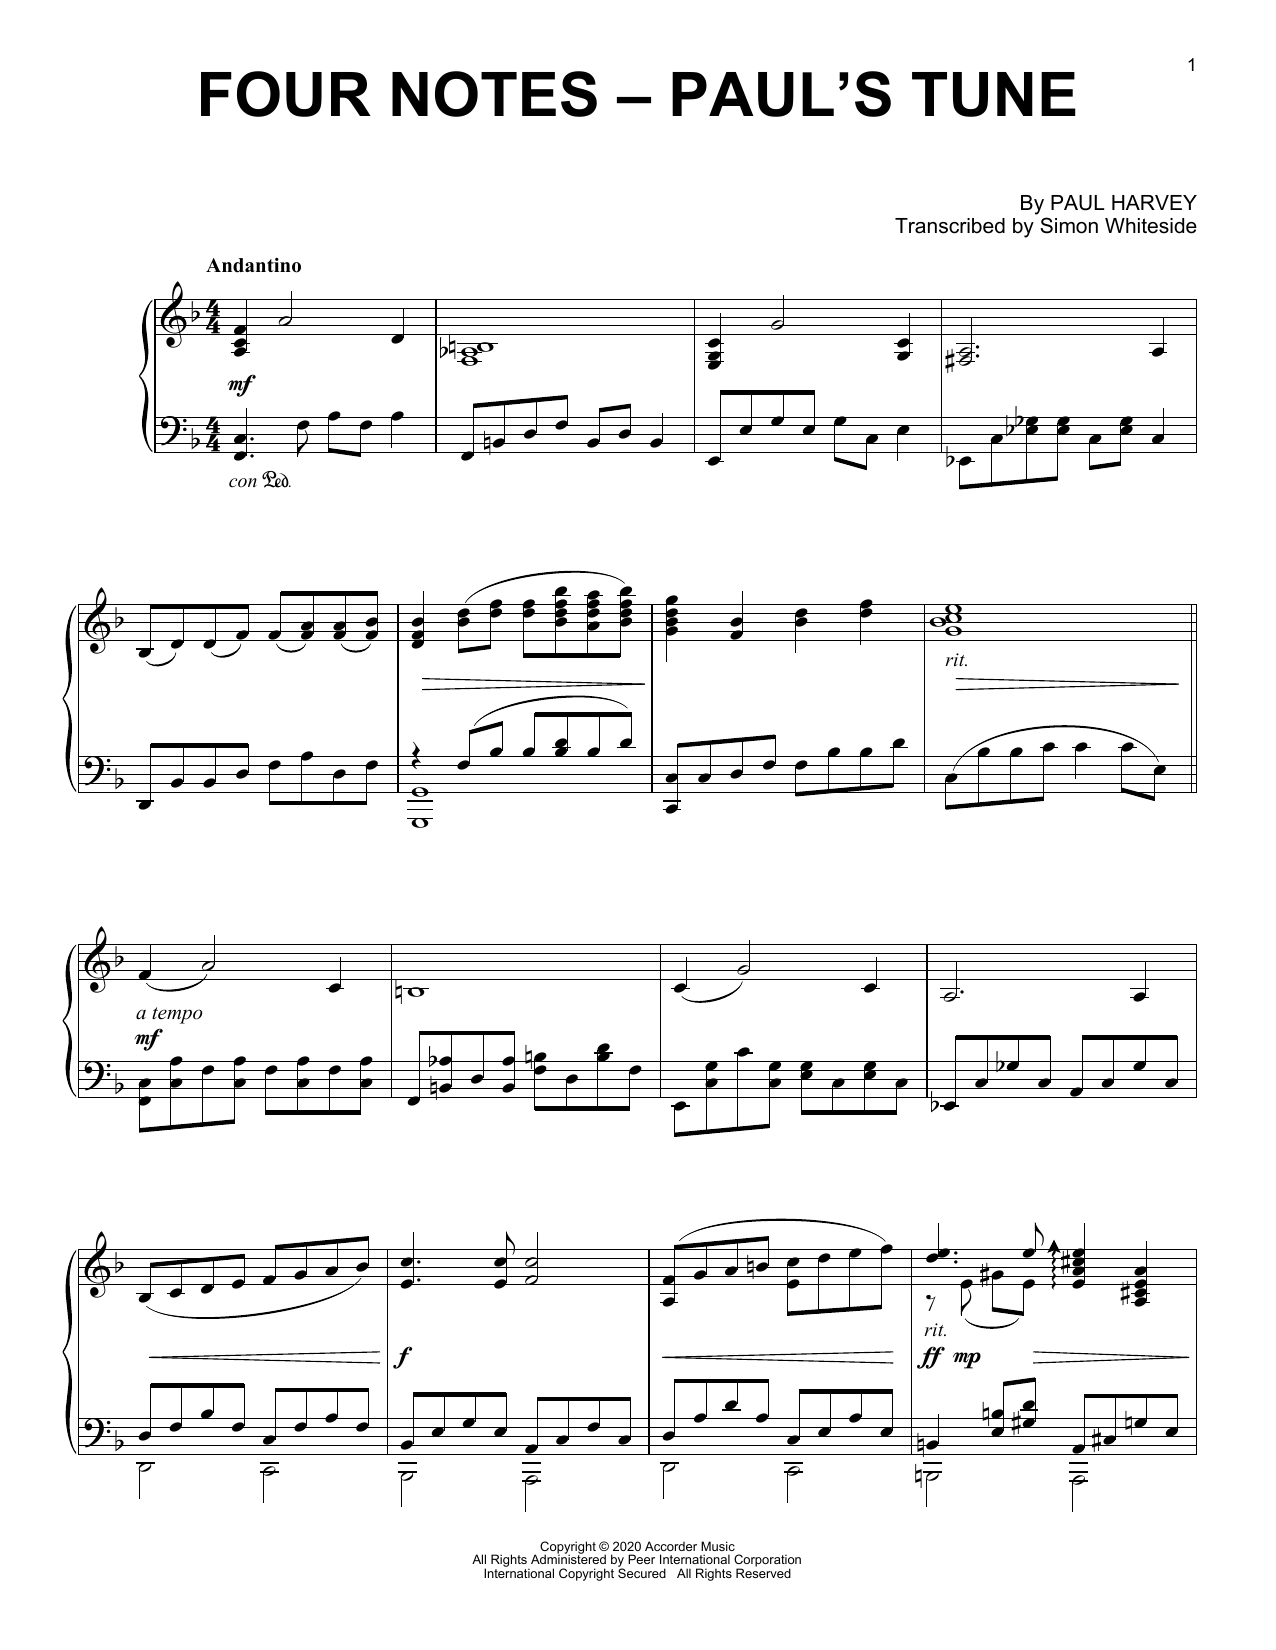 Download Paul Harvey Four Notes - Paul's Tune Sheet Music